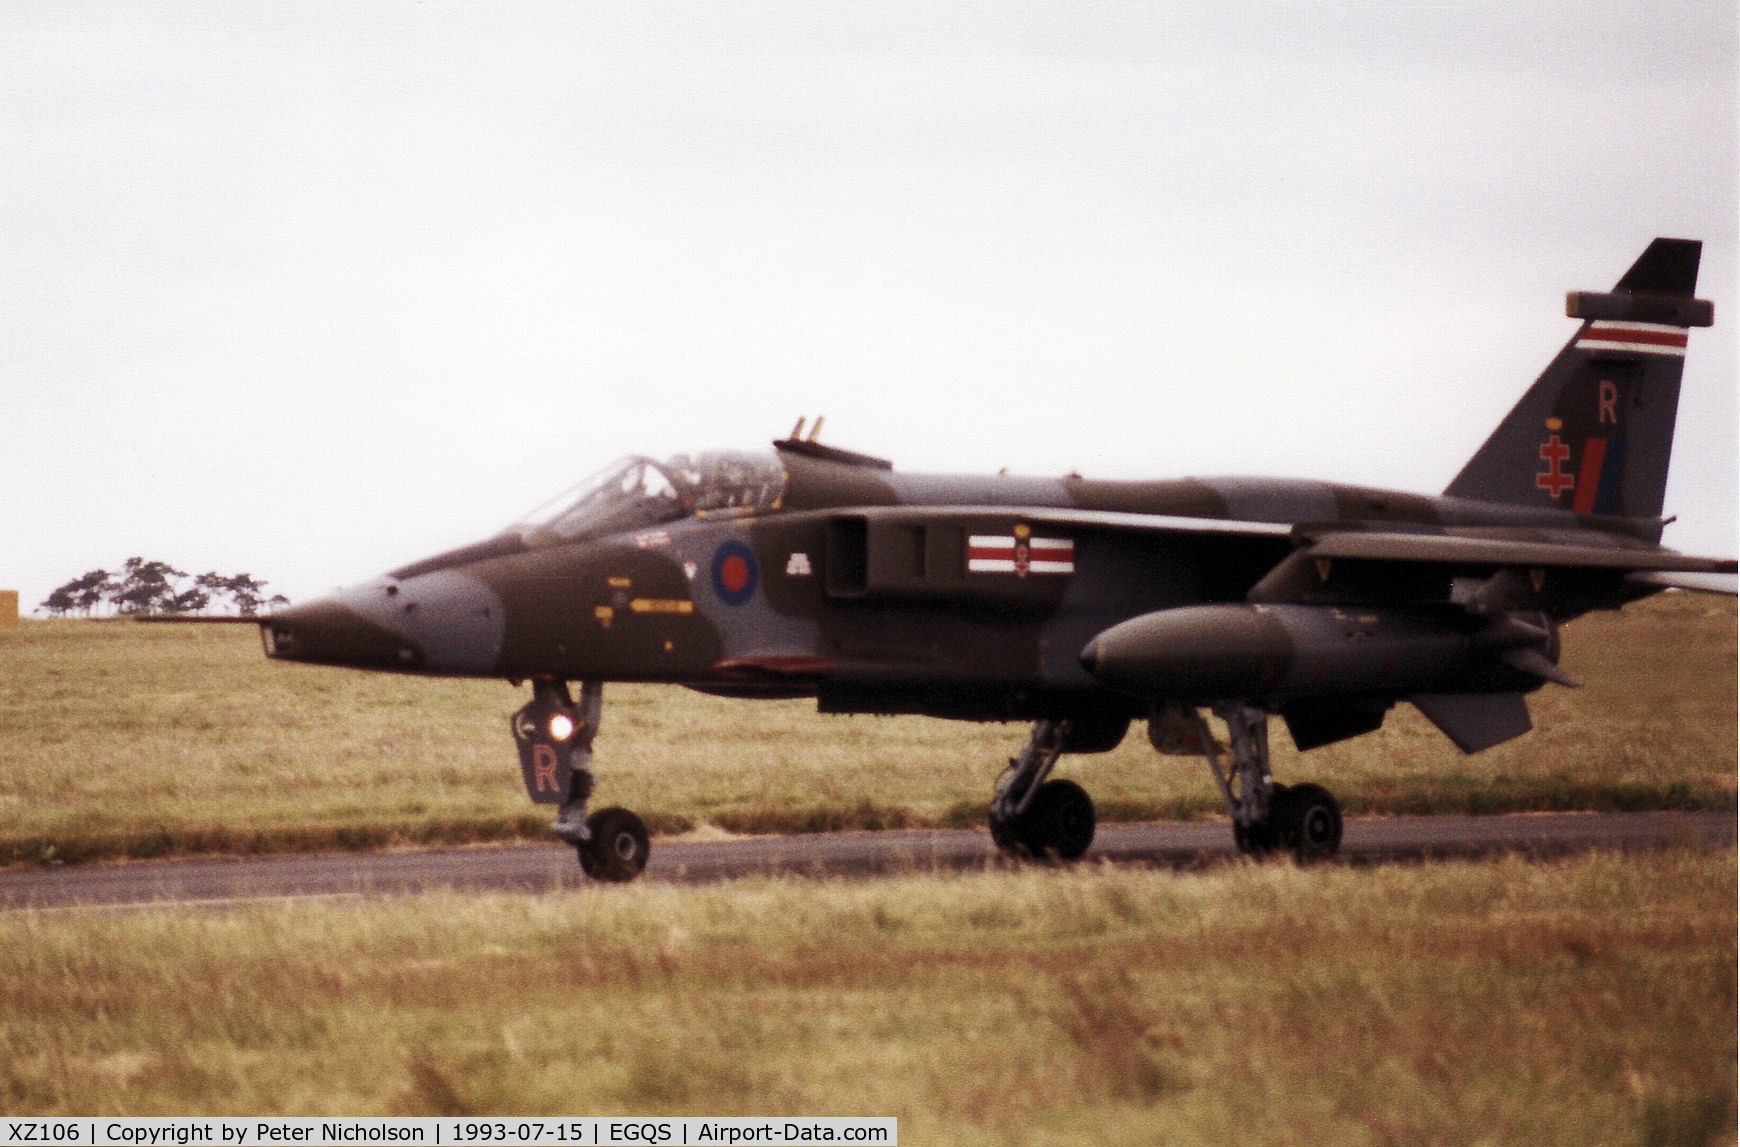 XZ106, 1976 Sepecat Jaguar GR.1A C/N S.107, Jaguar GR.1A, callsign Rebel, of 41 Squadron at RAF Coltishall taxying to the active runway at RAF Lossiemouth in the Summer of 1993.